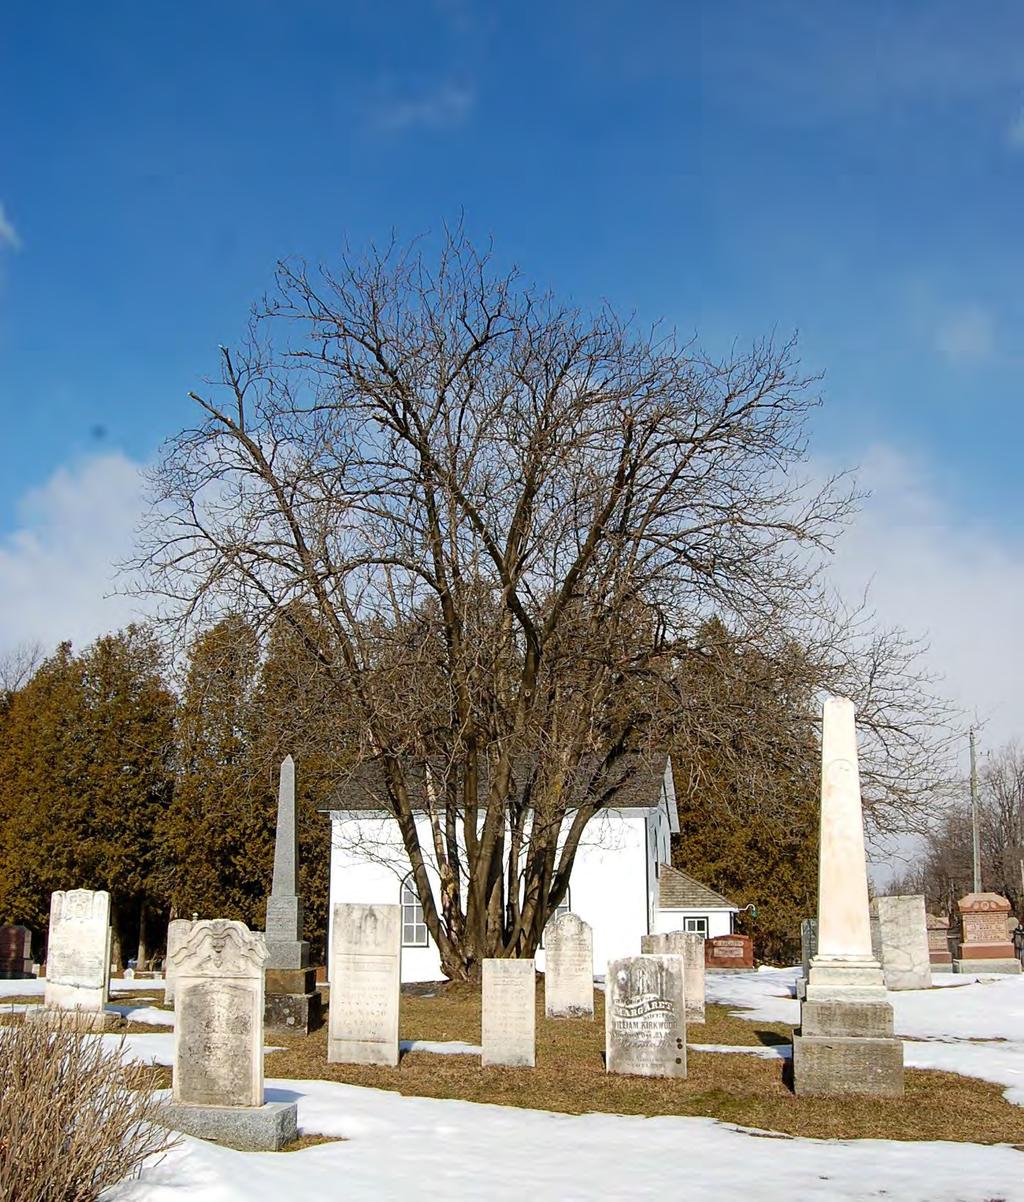 Ornate species, such as the Cypress cedar shown below right, were used to mark individual cemetery plots.